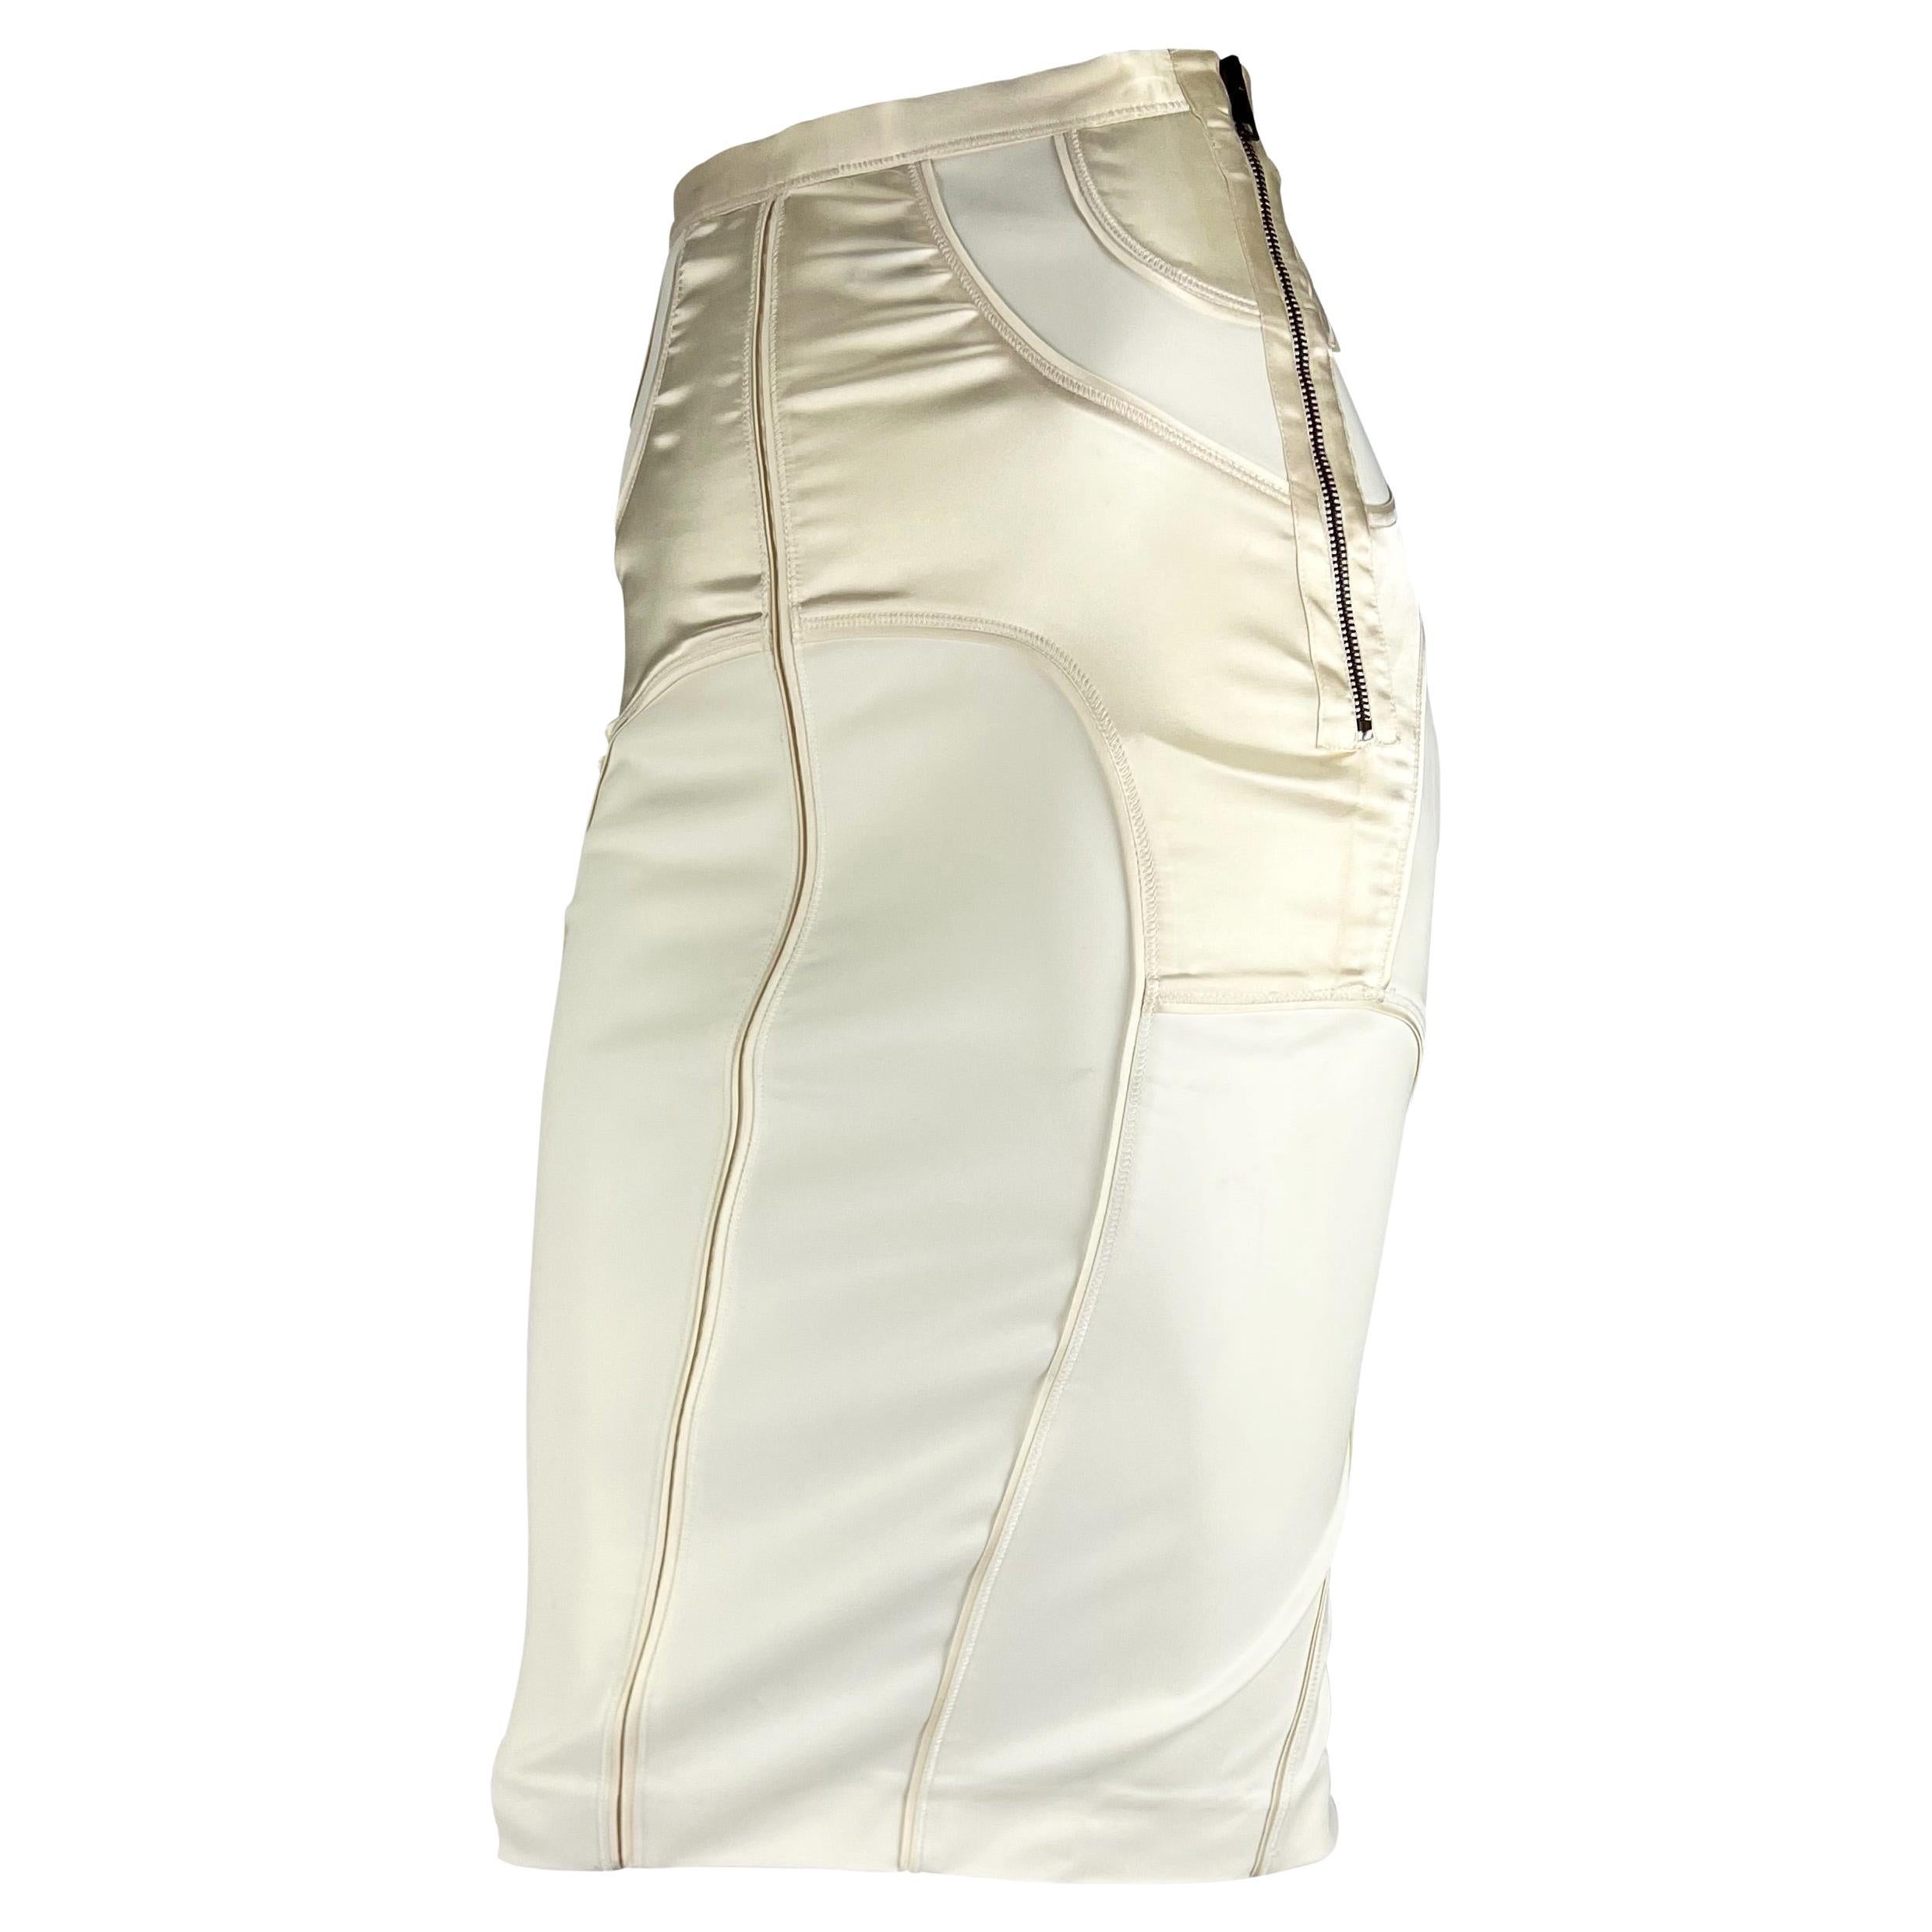 F/W 2003 Gucci by Tom Ford White Satin Panel Zip Stretch Skirt